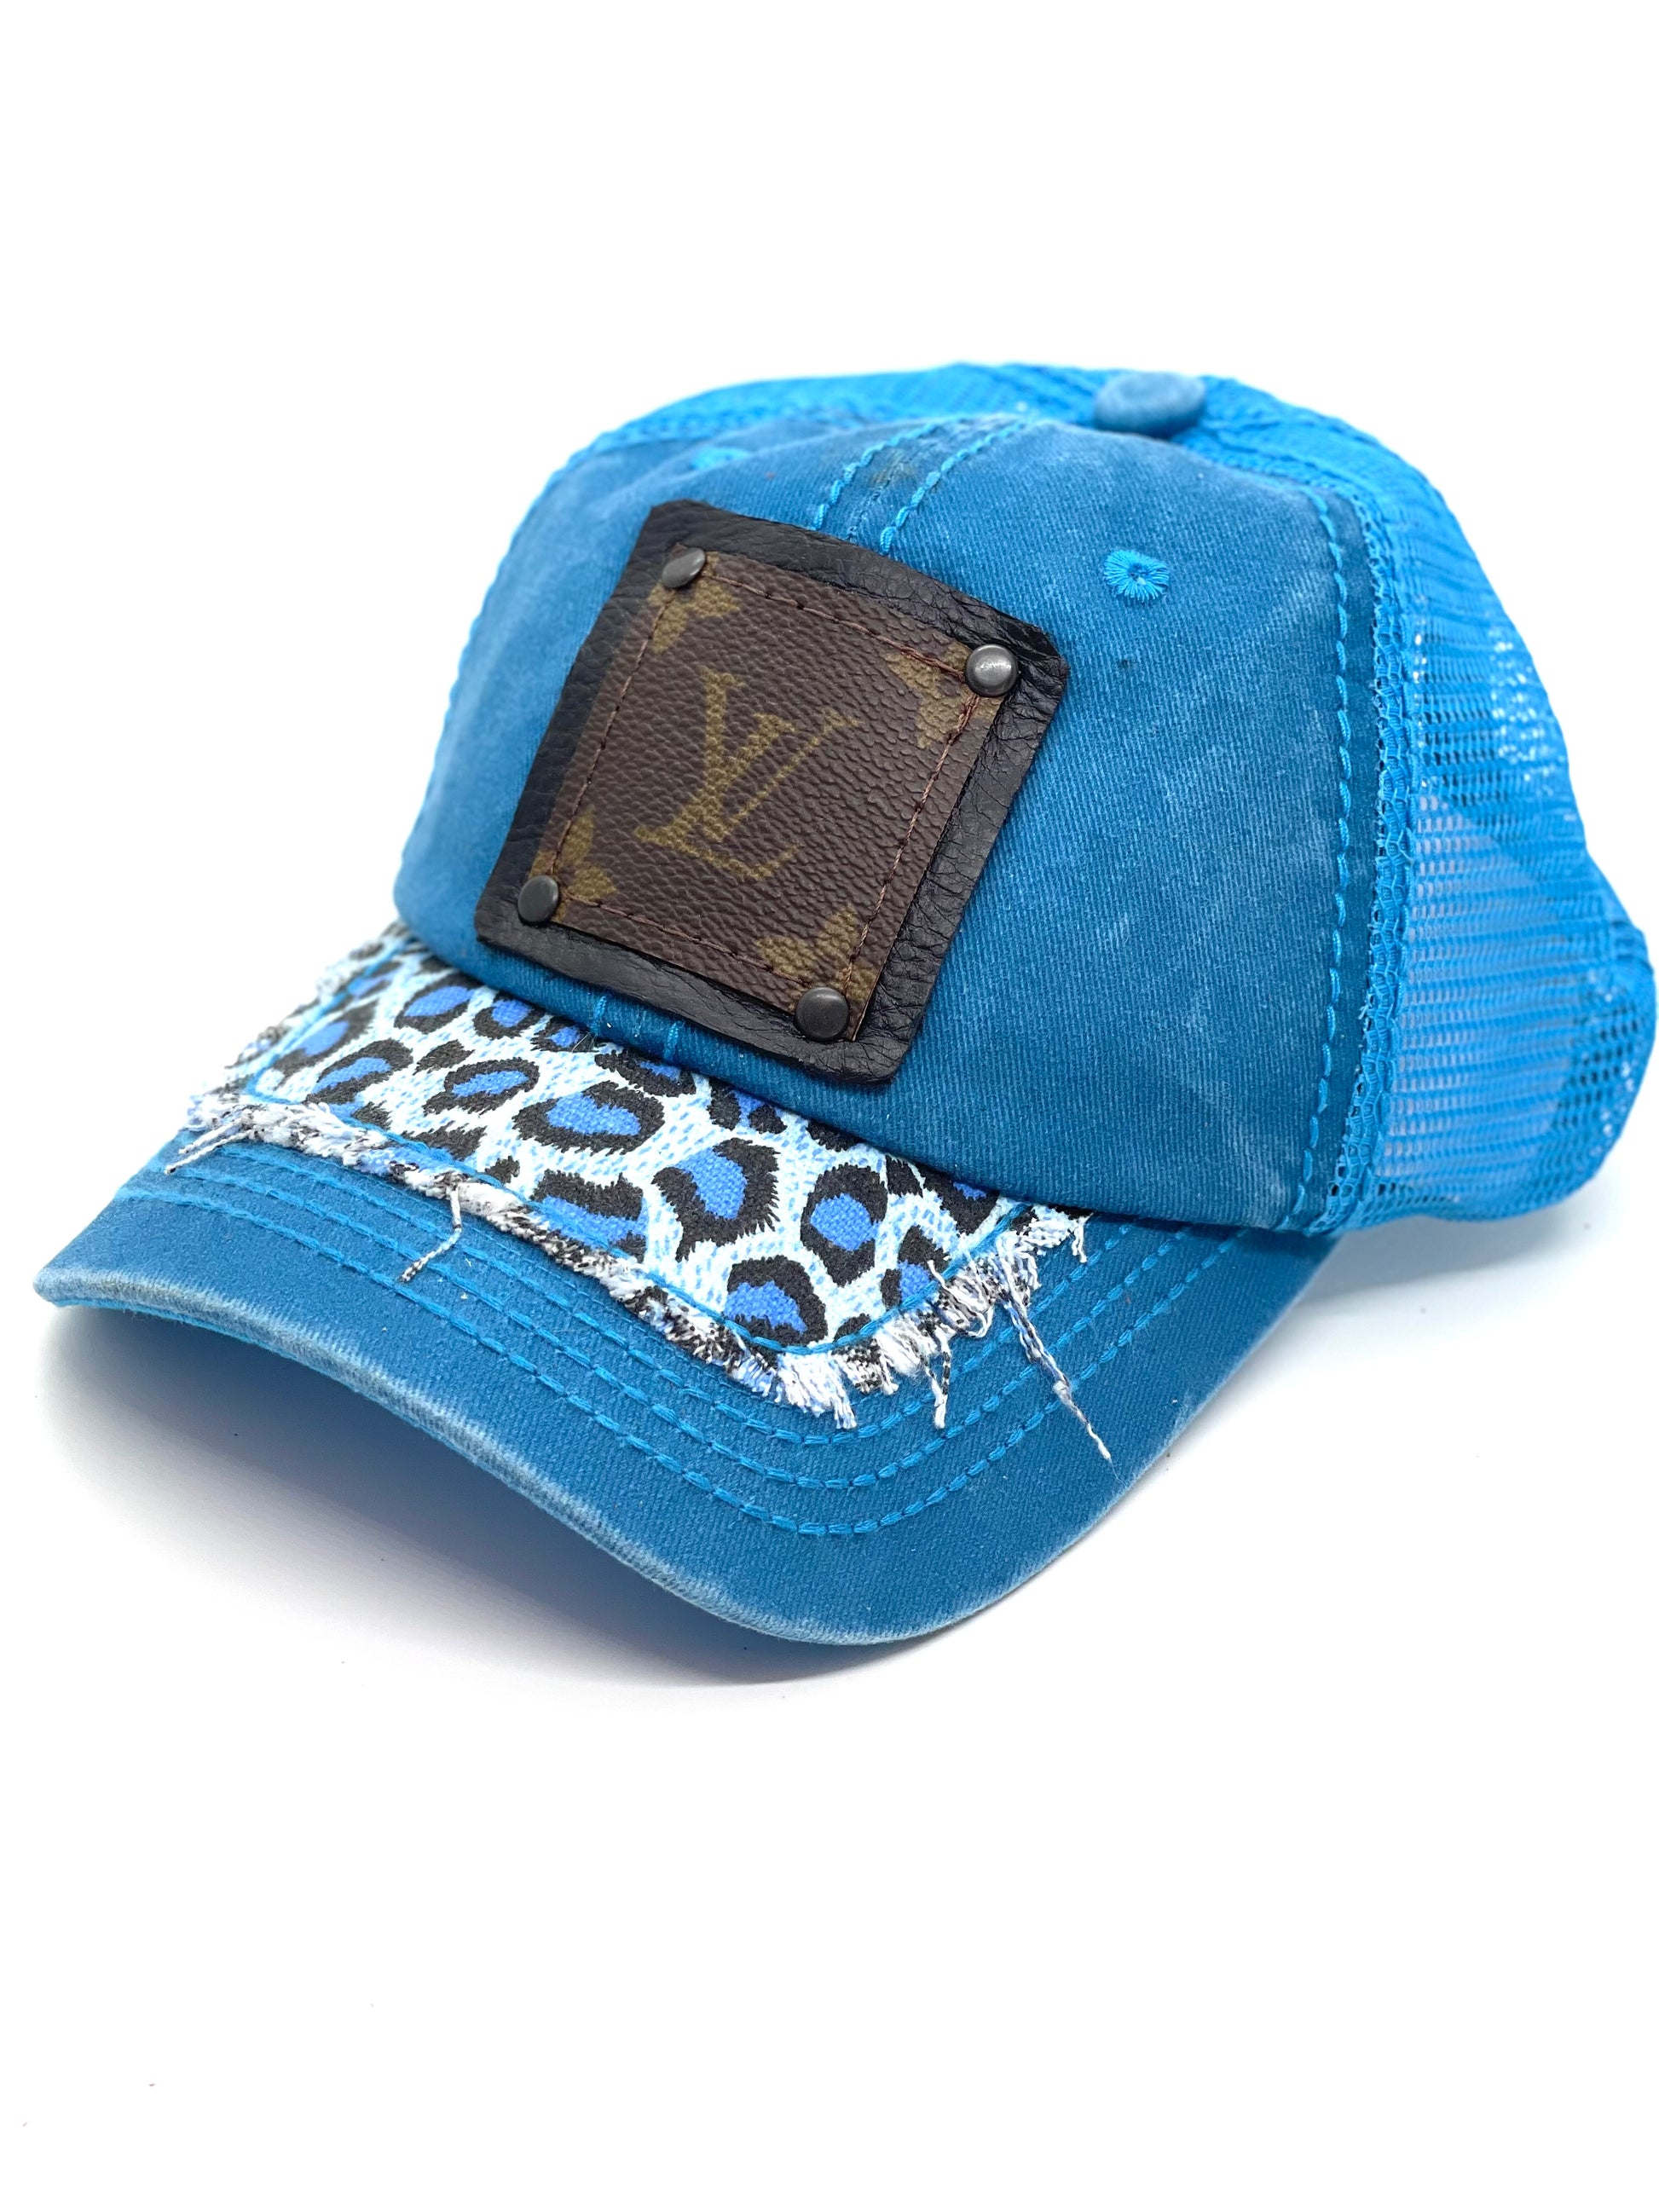 M6 - Blueberry leopard hat Black/black - Patches Of Upcycling